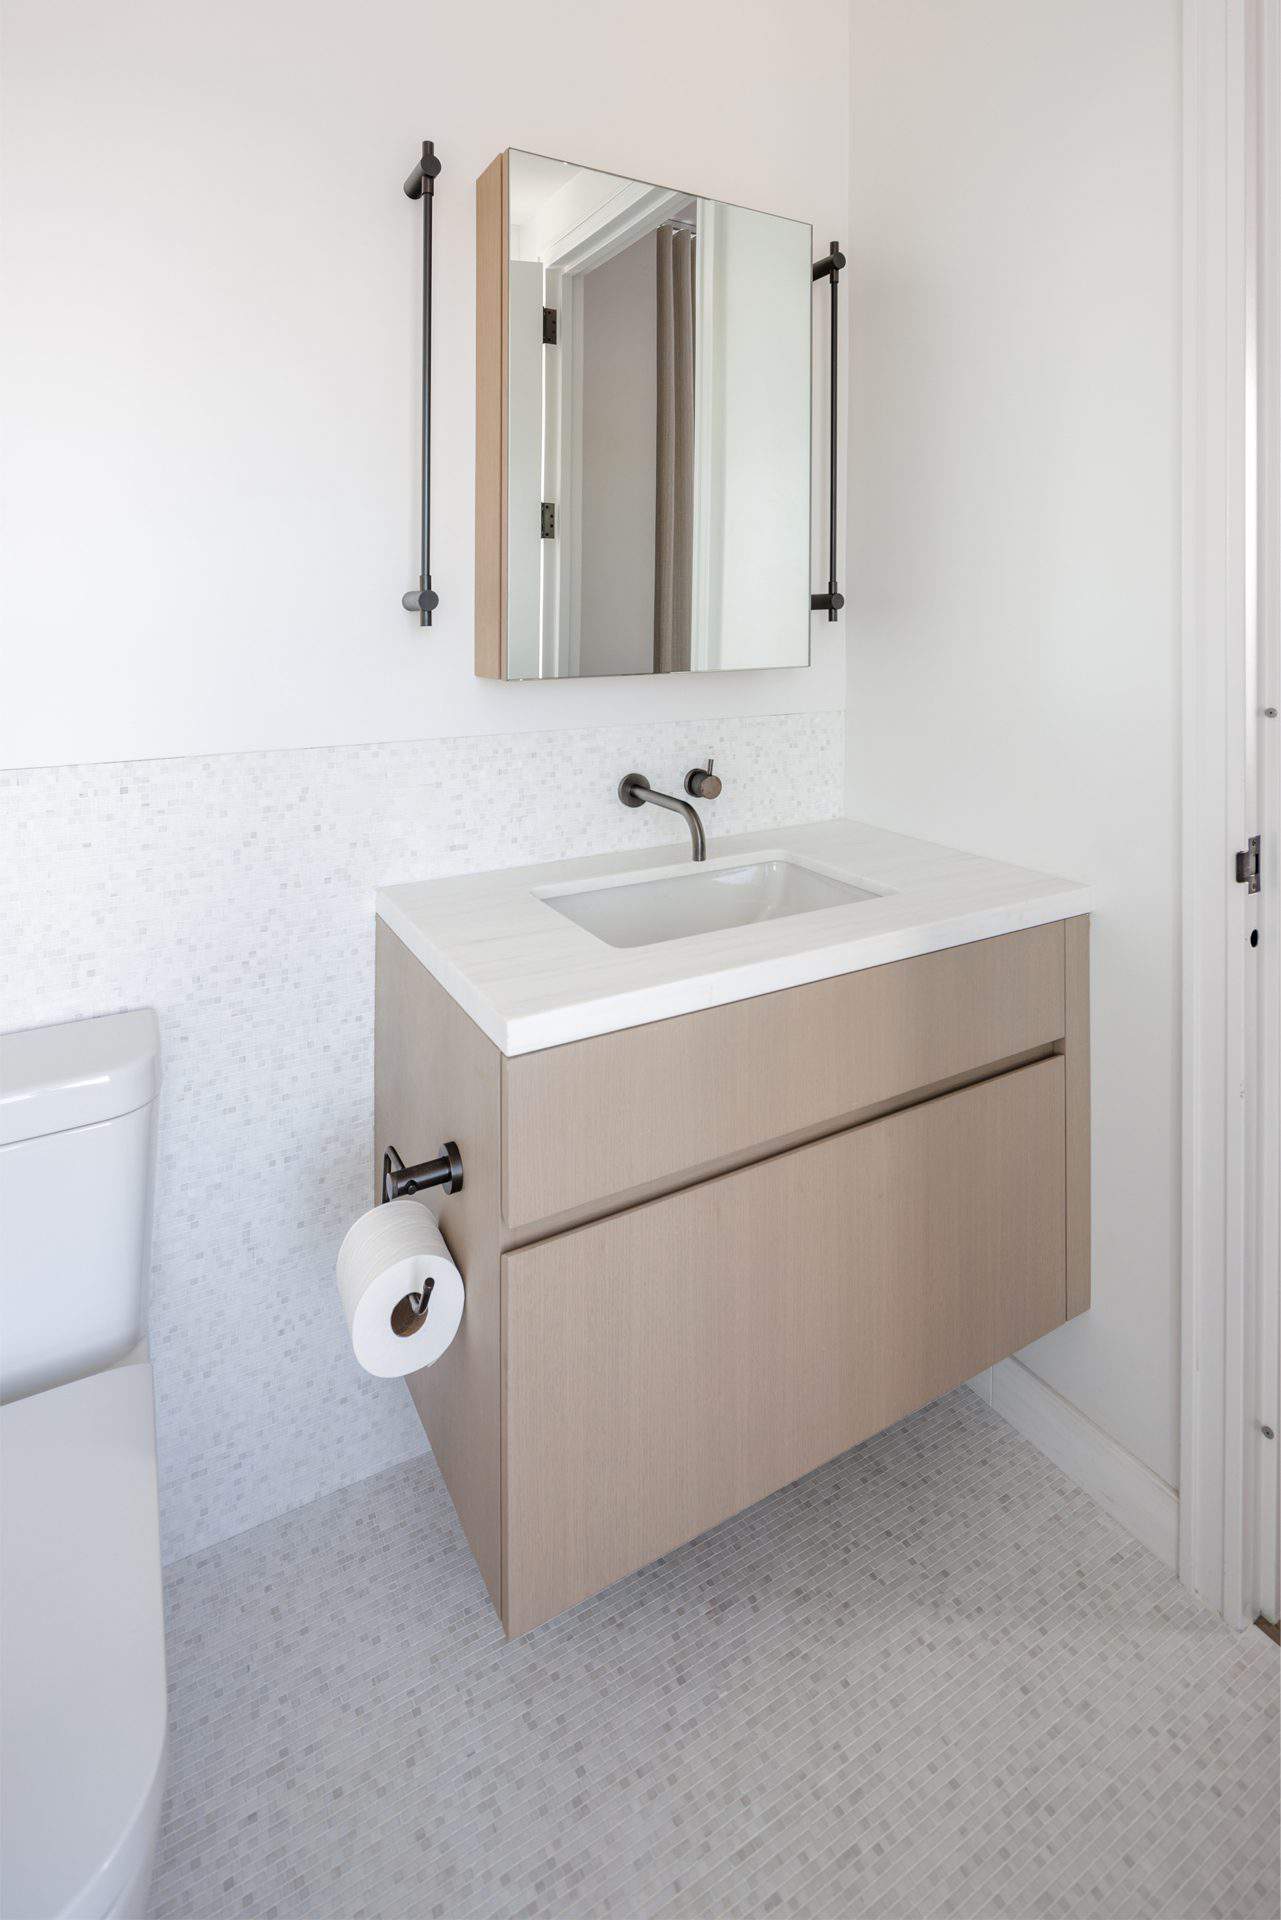 Bilotta vanity in Rift Cut White Oak, Natural Stain, White mosaic Artist Tile on floor and wall, with mirror.